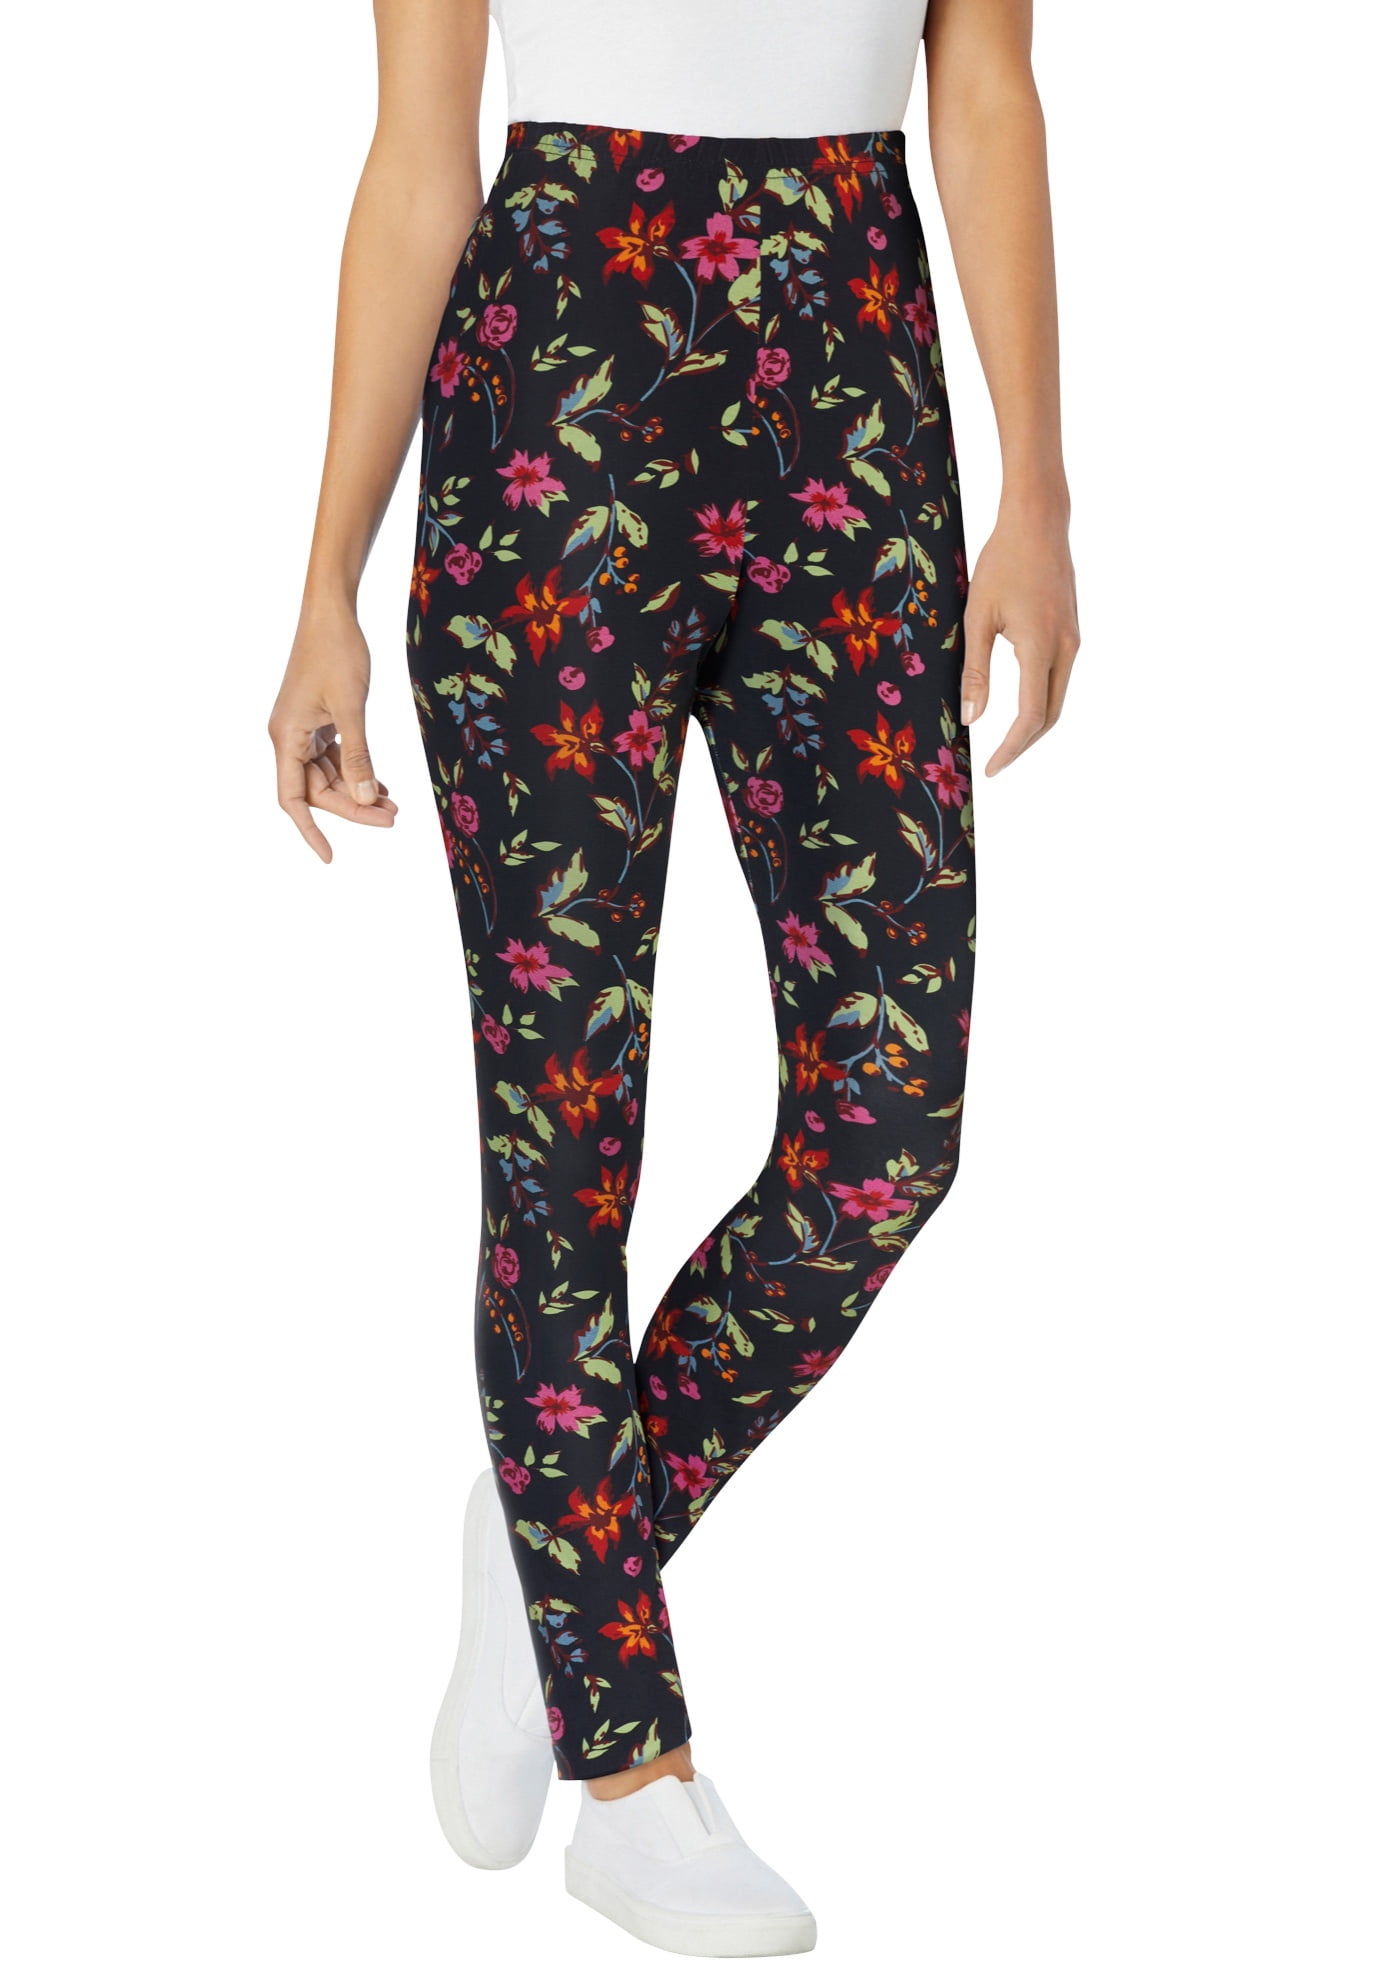 Woman Within Women's Plus Size Stretch Cotton Printed Legging - 1X, Black  Graphic Floral Multicolored - Walmart.com